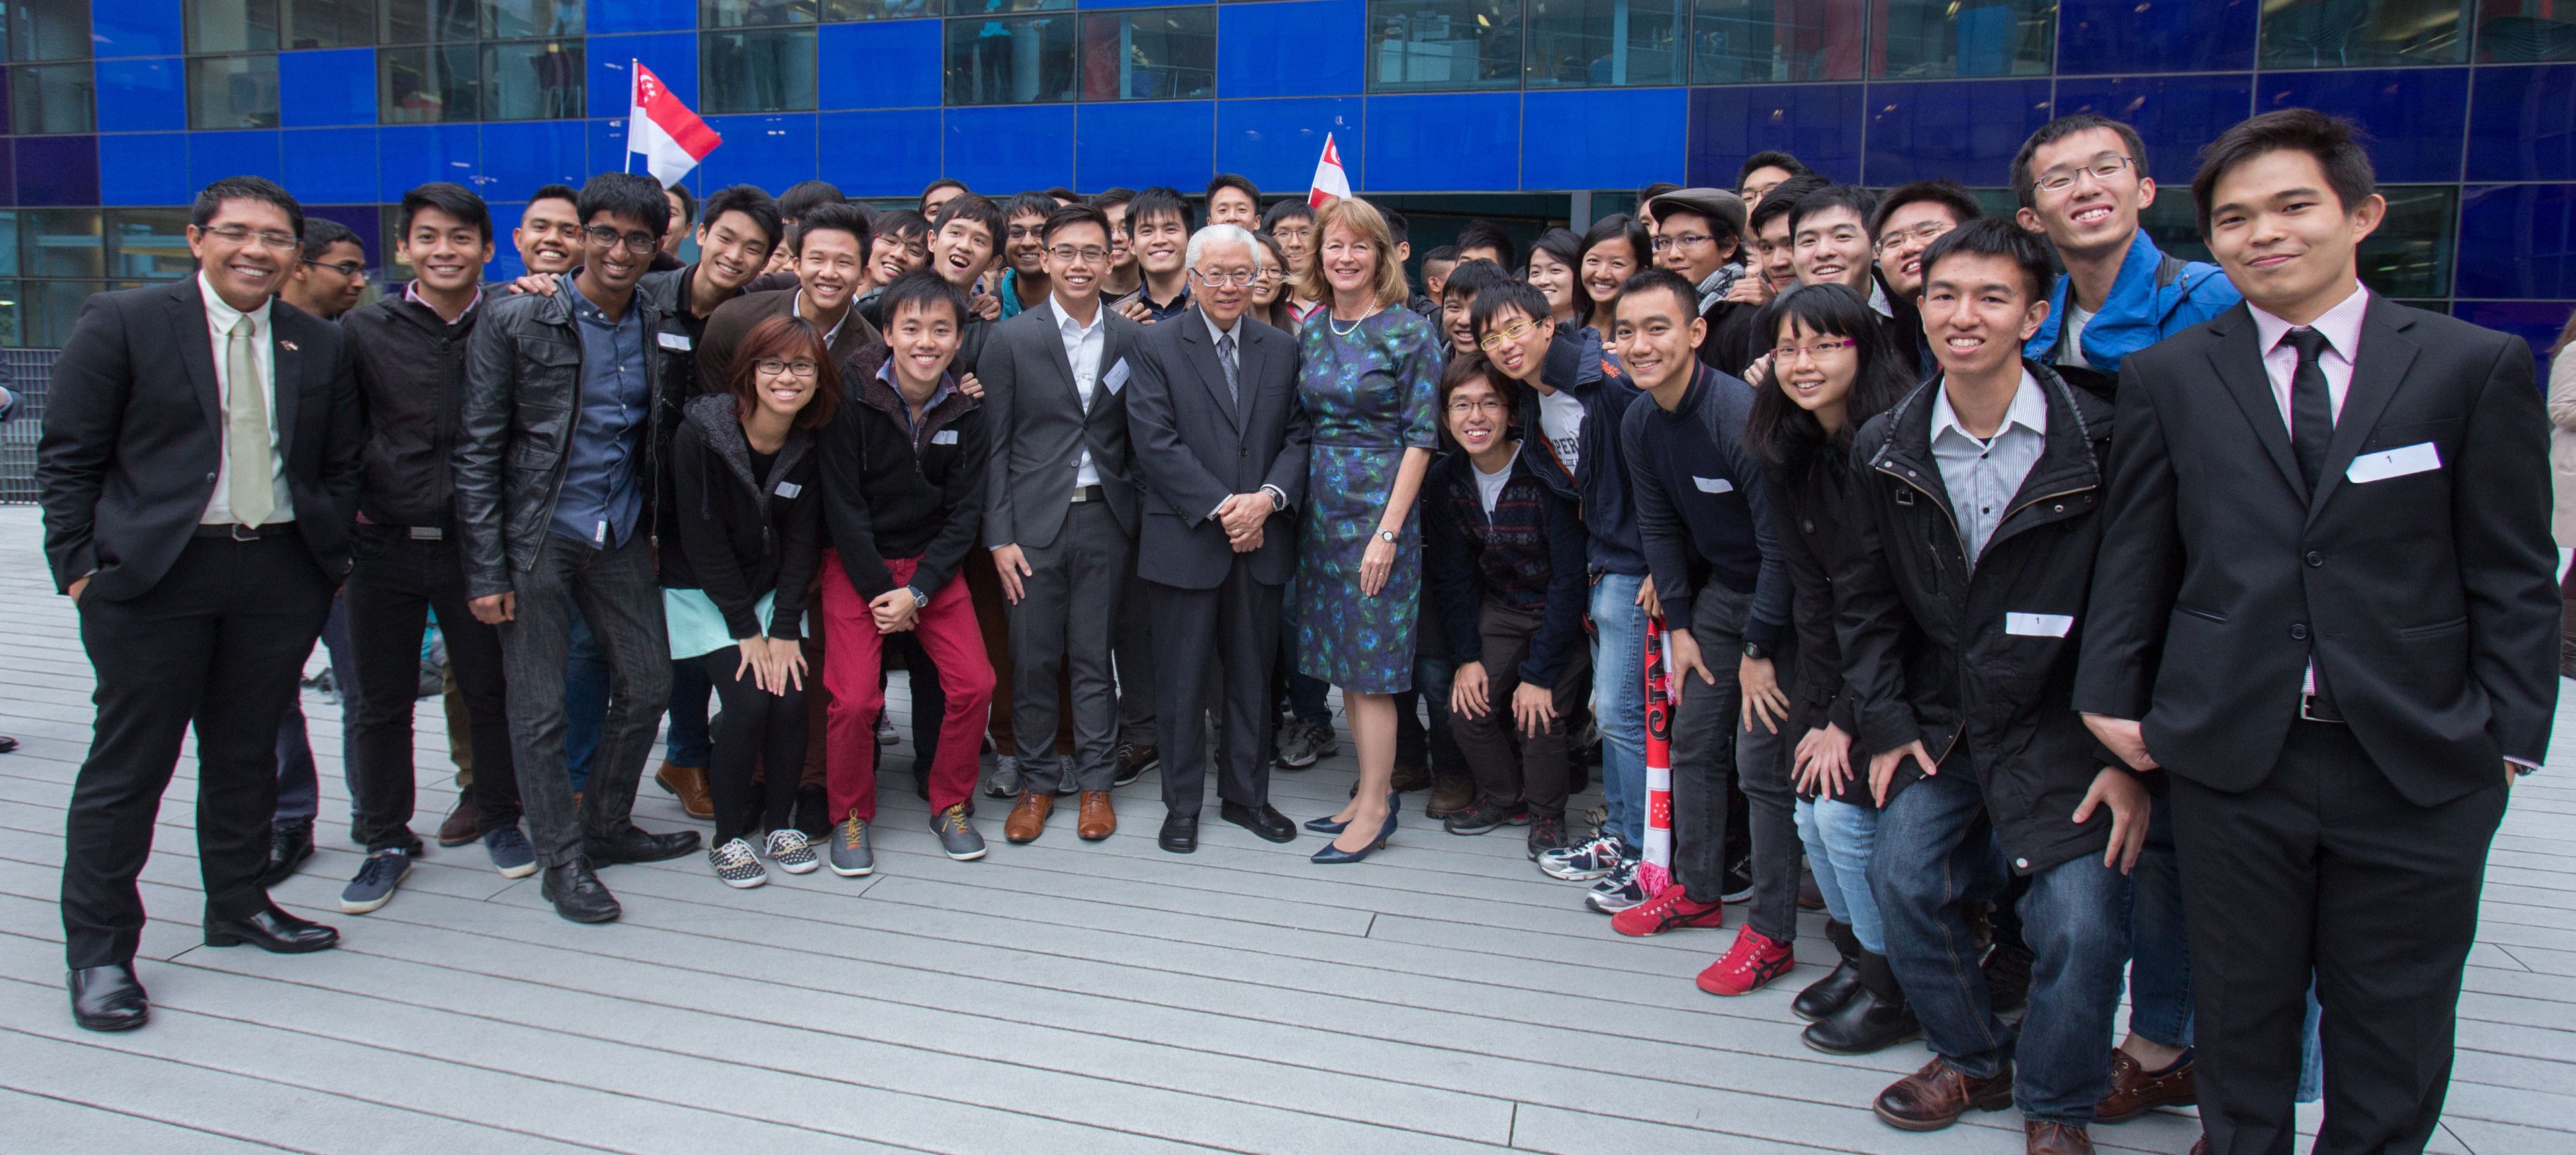 A group of Singaporean students at Imperial posing with President Alice Gast and former Singaporean President Tony Tan Keng Yam at the College's South Kensington Campus